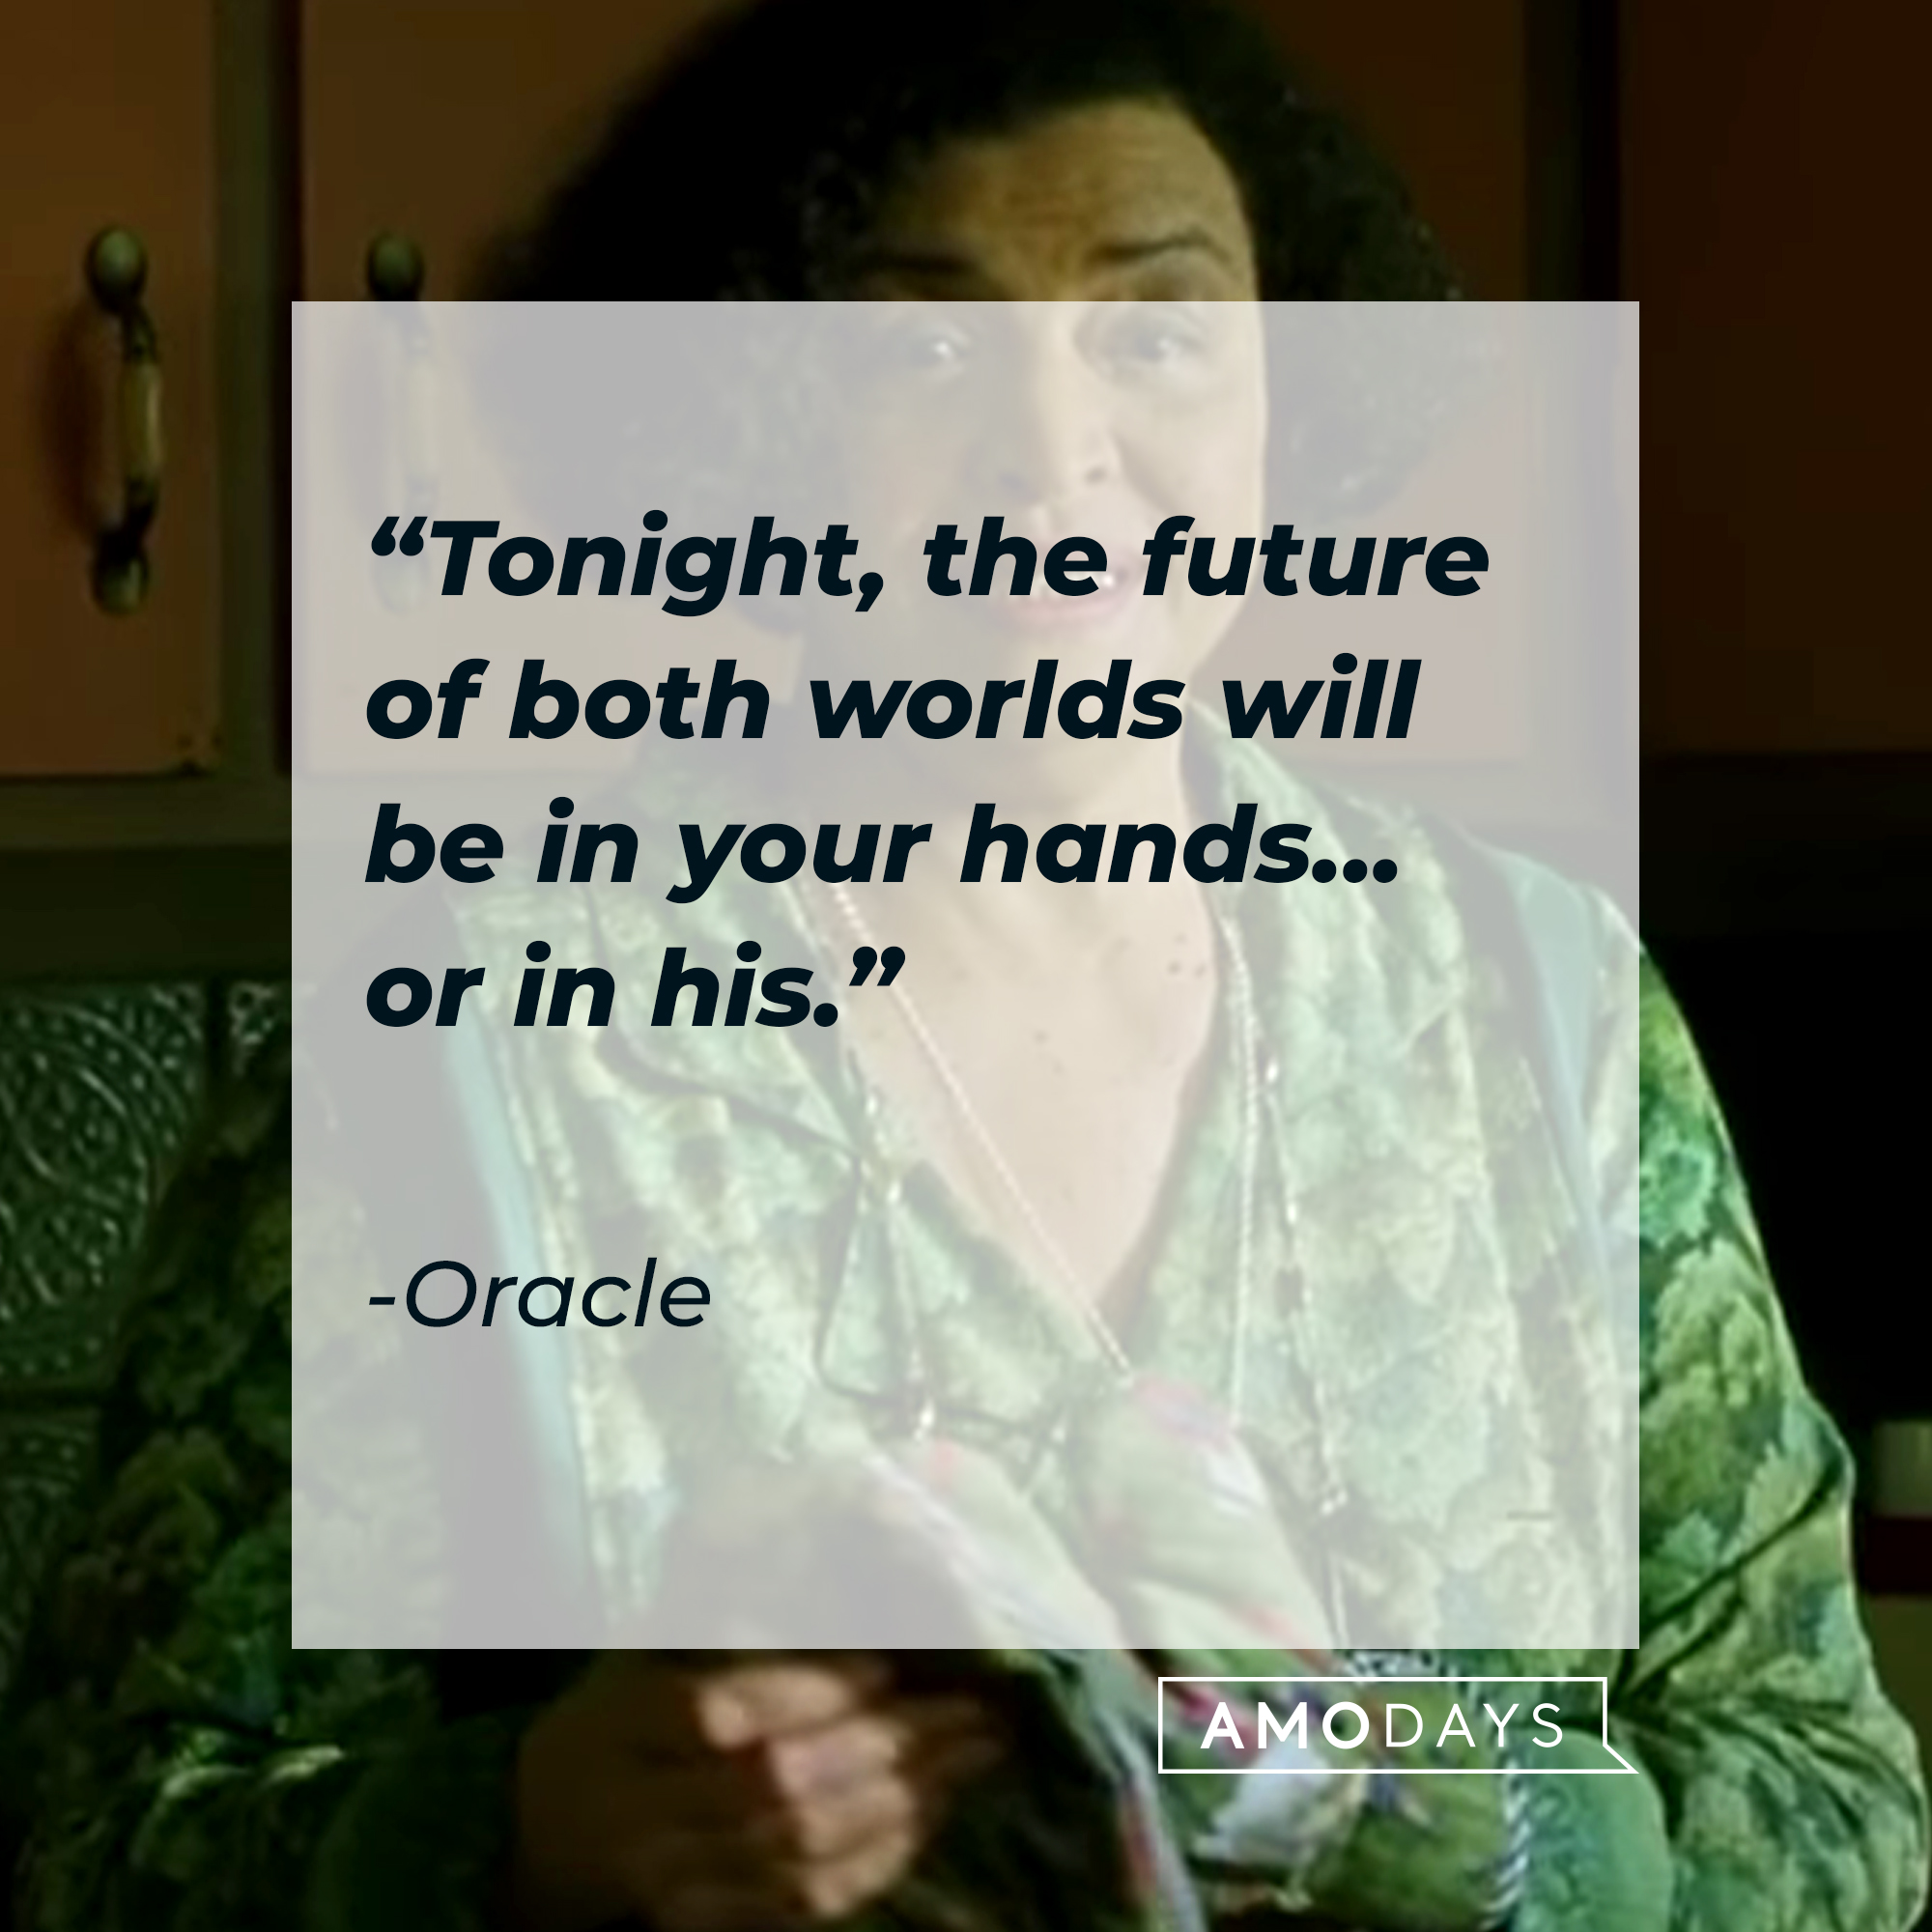 Oracle's quote: “Tonight, the future of both worlds will be in your hands… or in his.” | Source: facebook.com/TheMatrixMovie